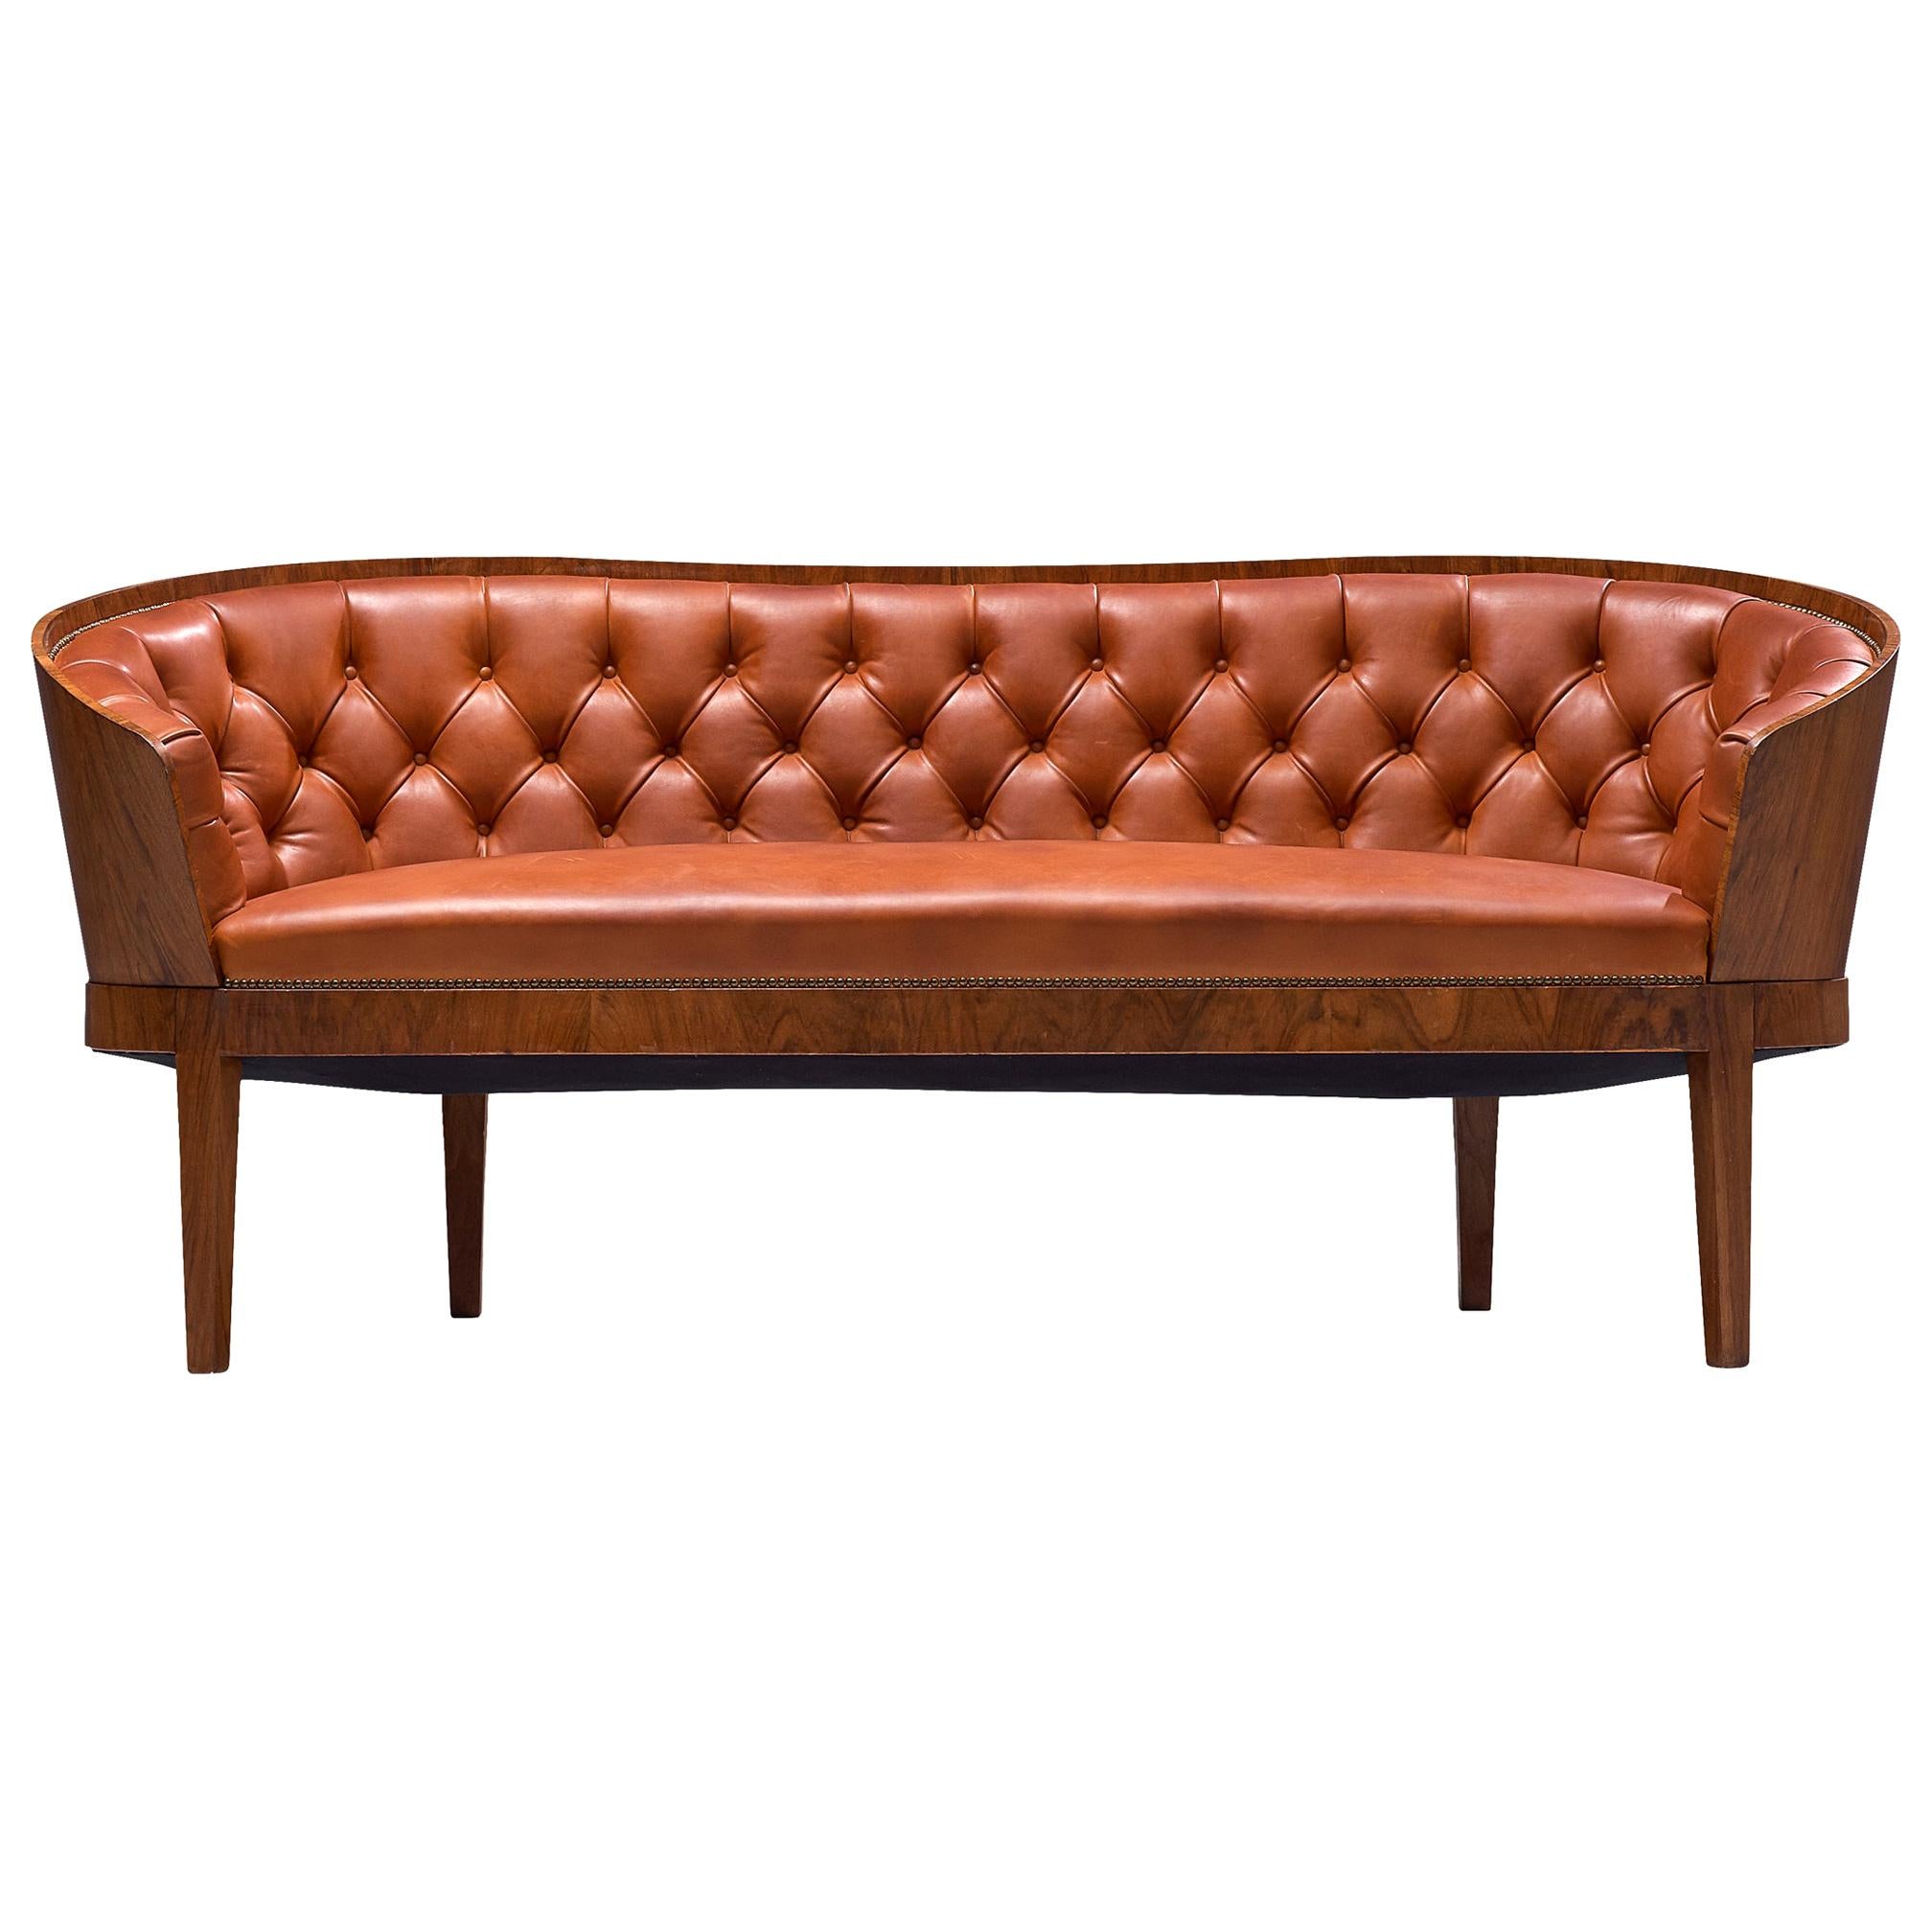 Danish Art Deco Sofa with Walnut Frame and Tufted Red Leather